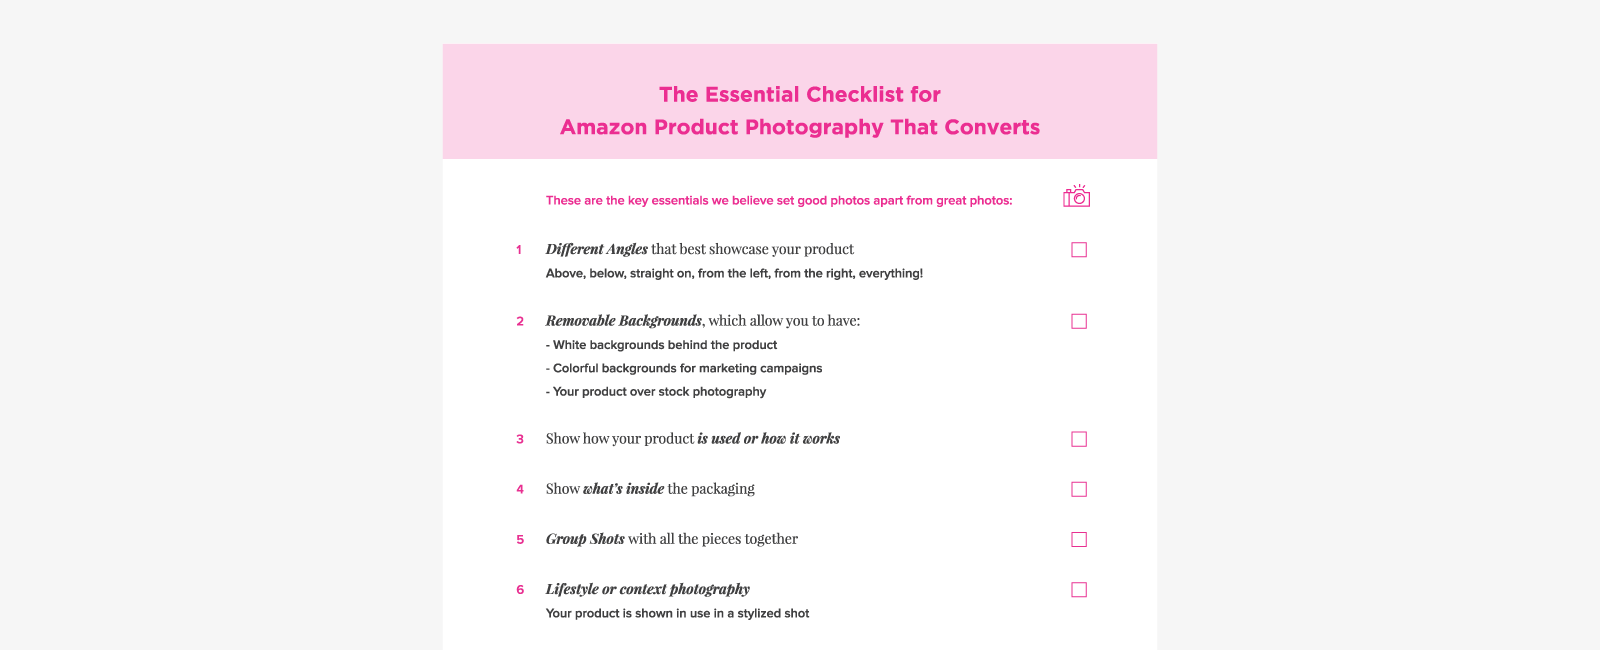 The Essential Checklist for Amazon Product Photography that Converts by Fuze Branding